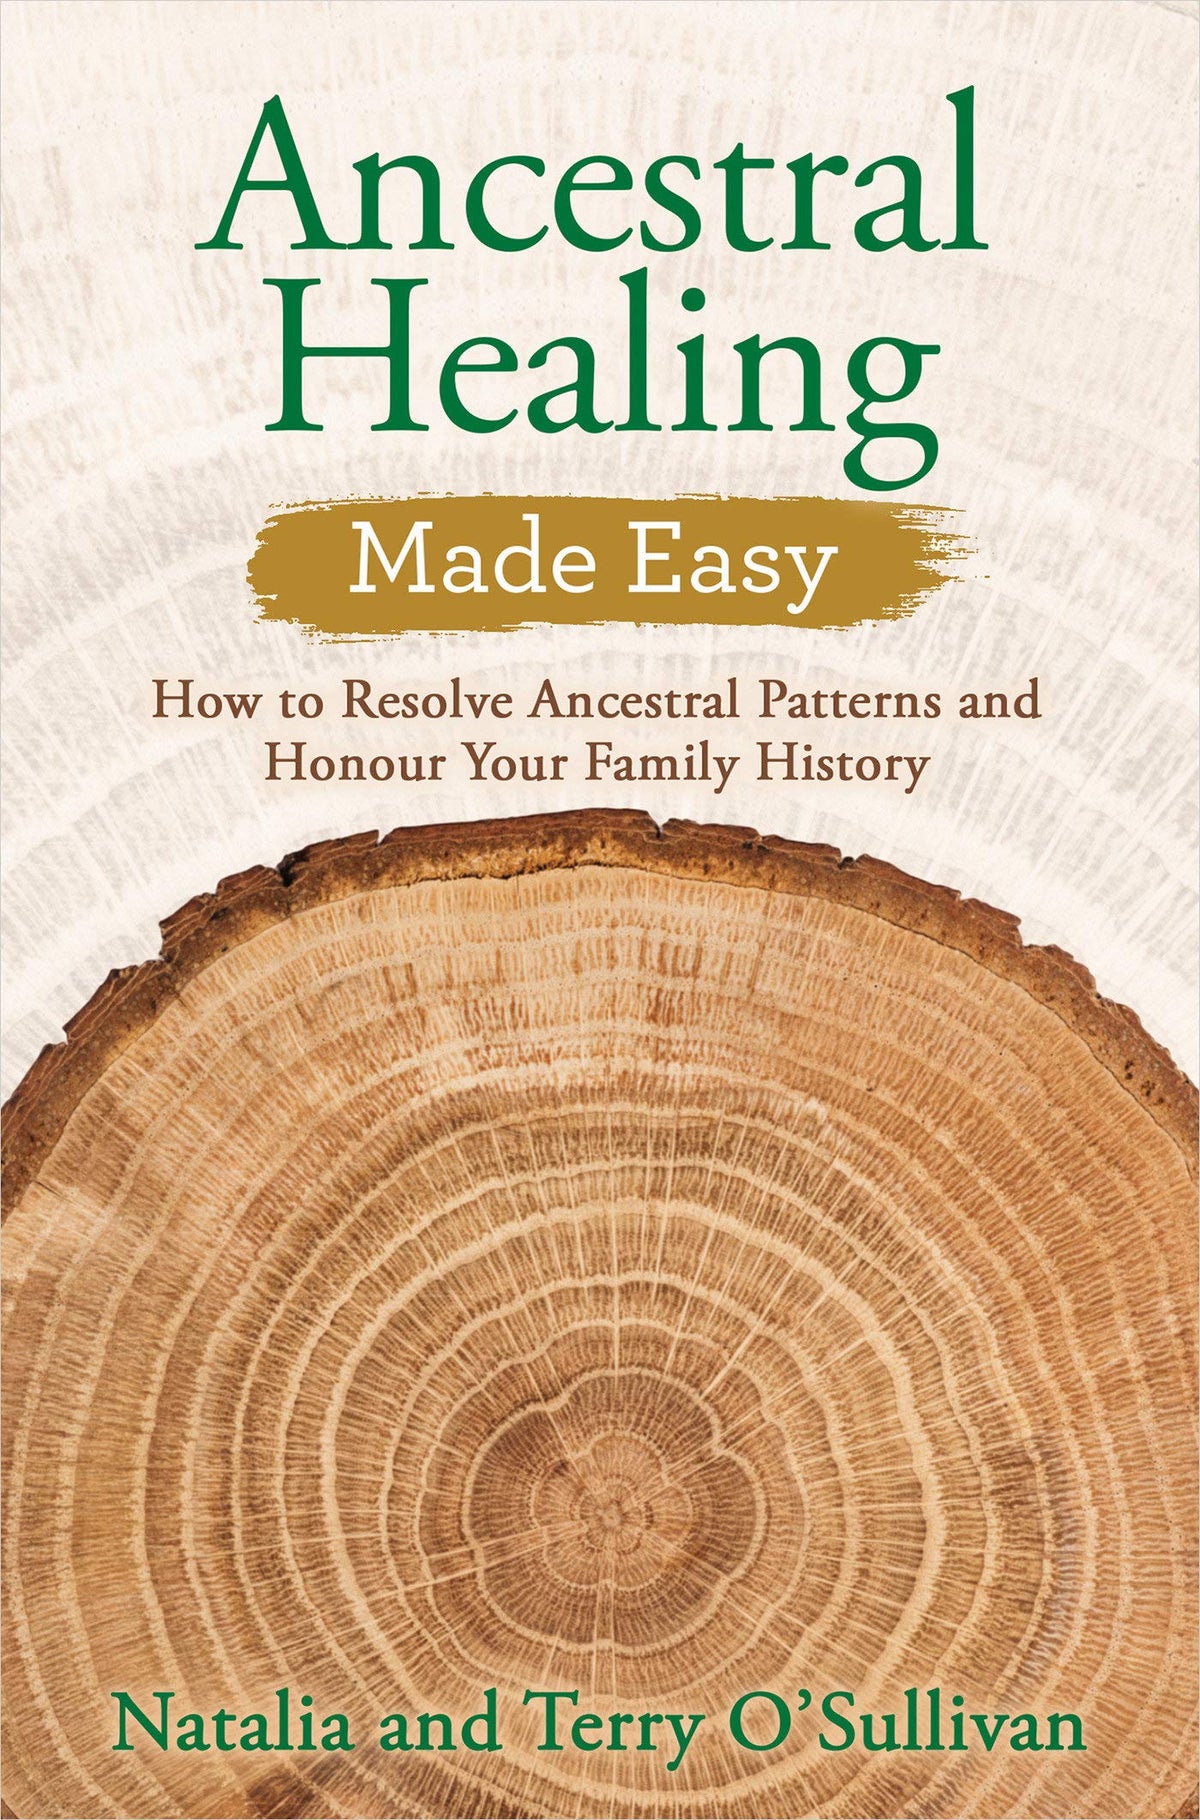 Ancestral Healing Made Easy: How to Resolve Ancestral Patterns and Honor Your Family History